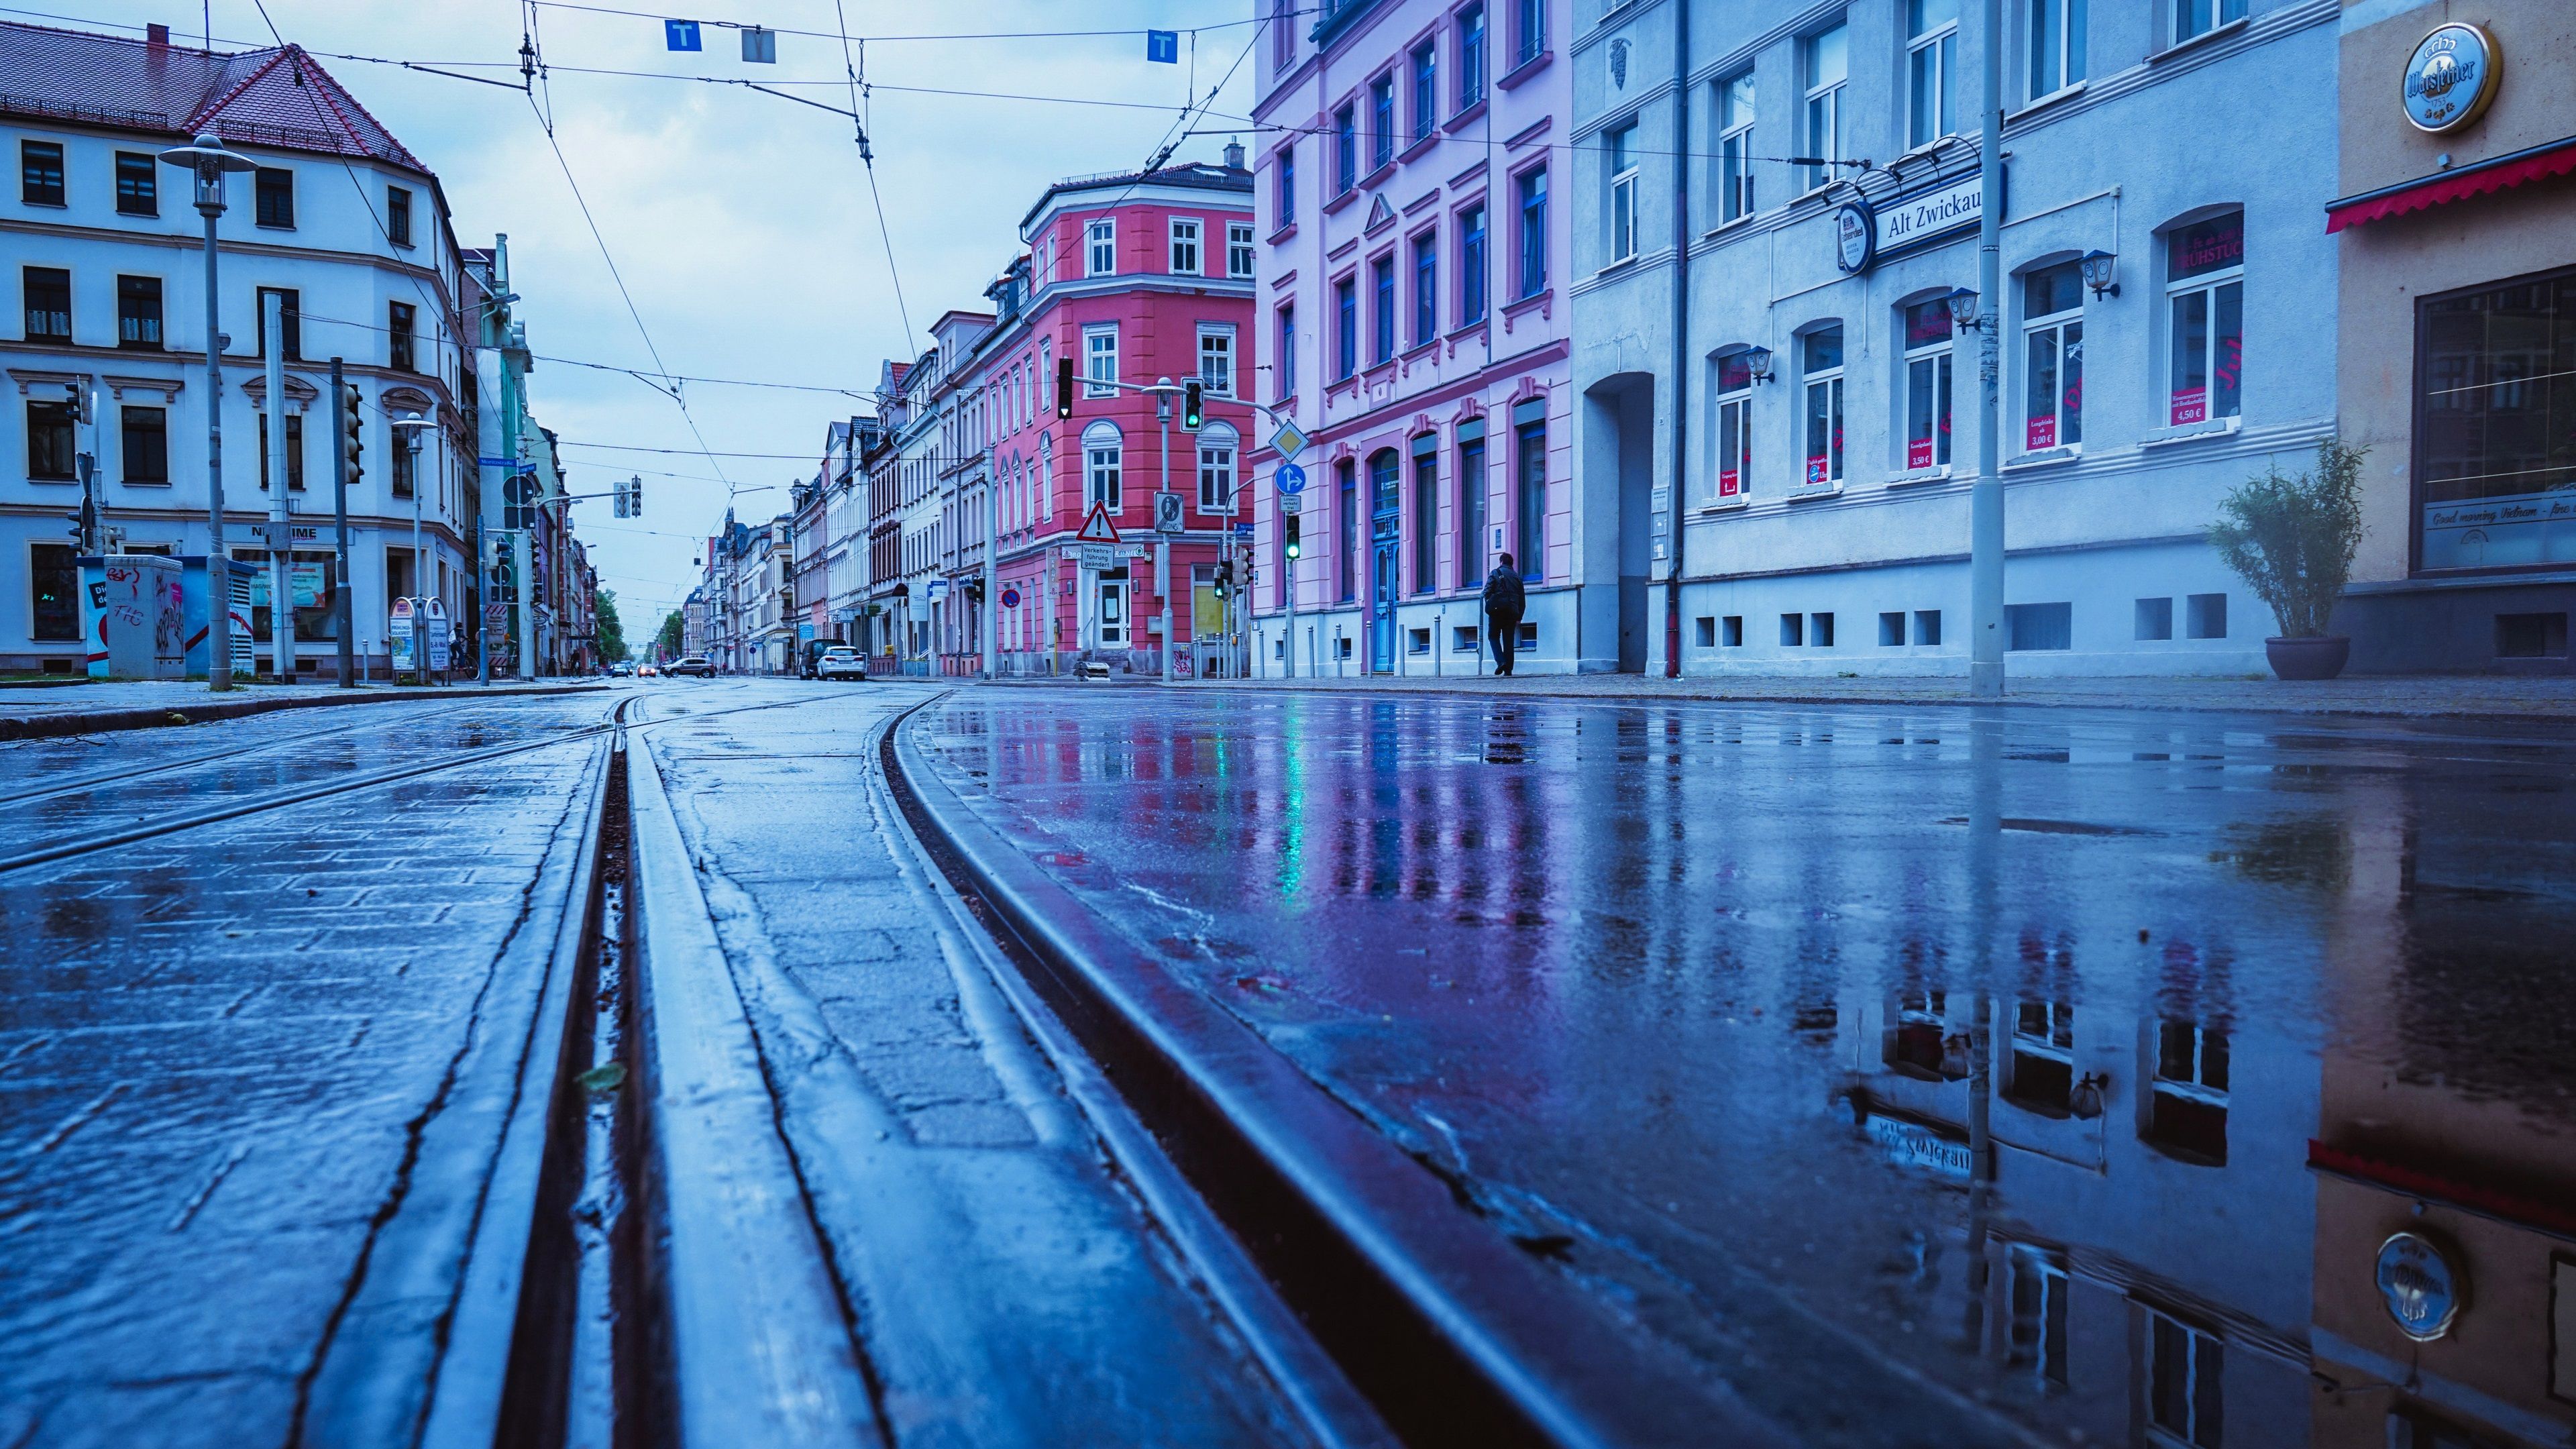 Wallpaper Germany, rainy day, city, street, wet ground 3840x2160 UHD 4K Picture, Image